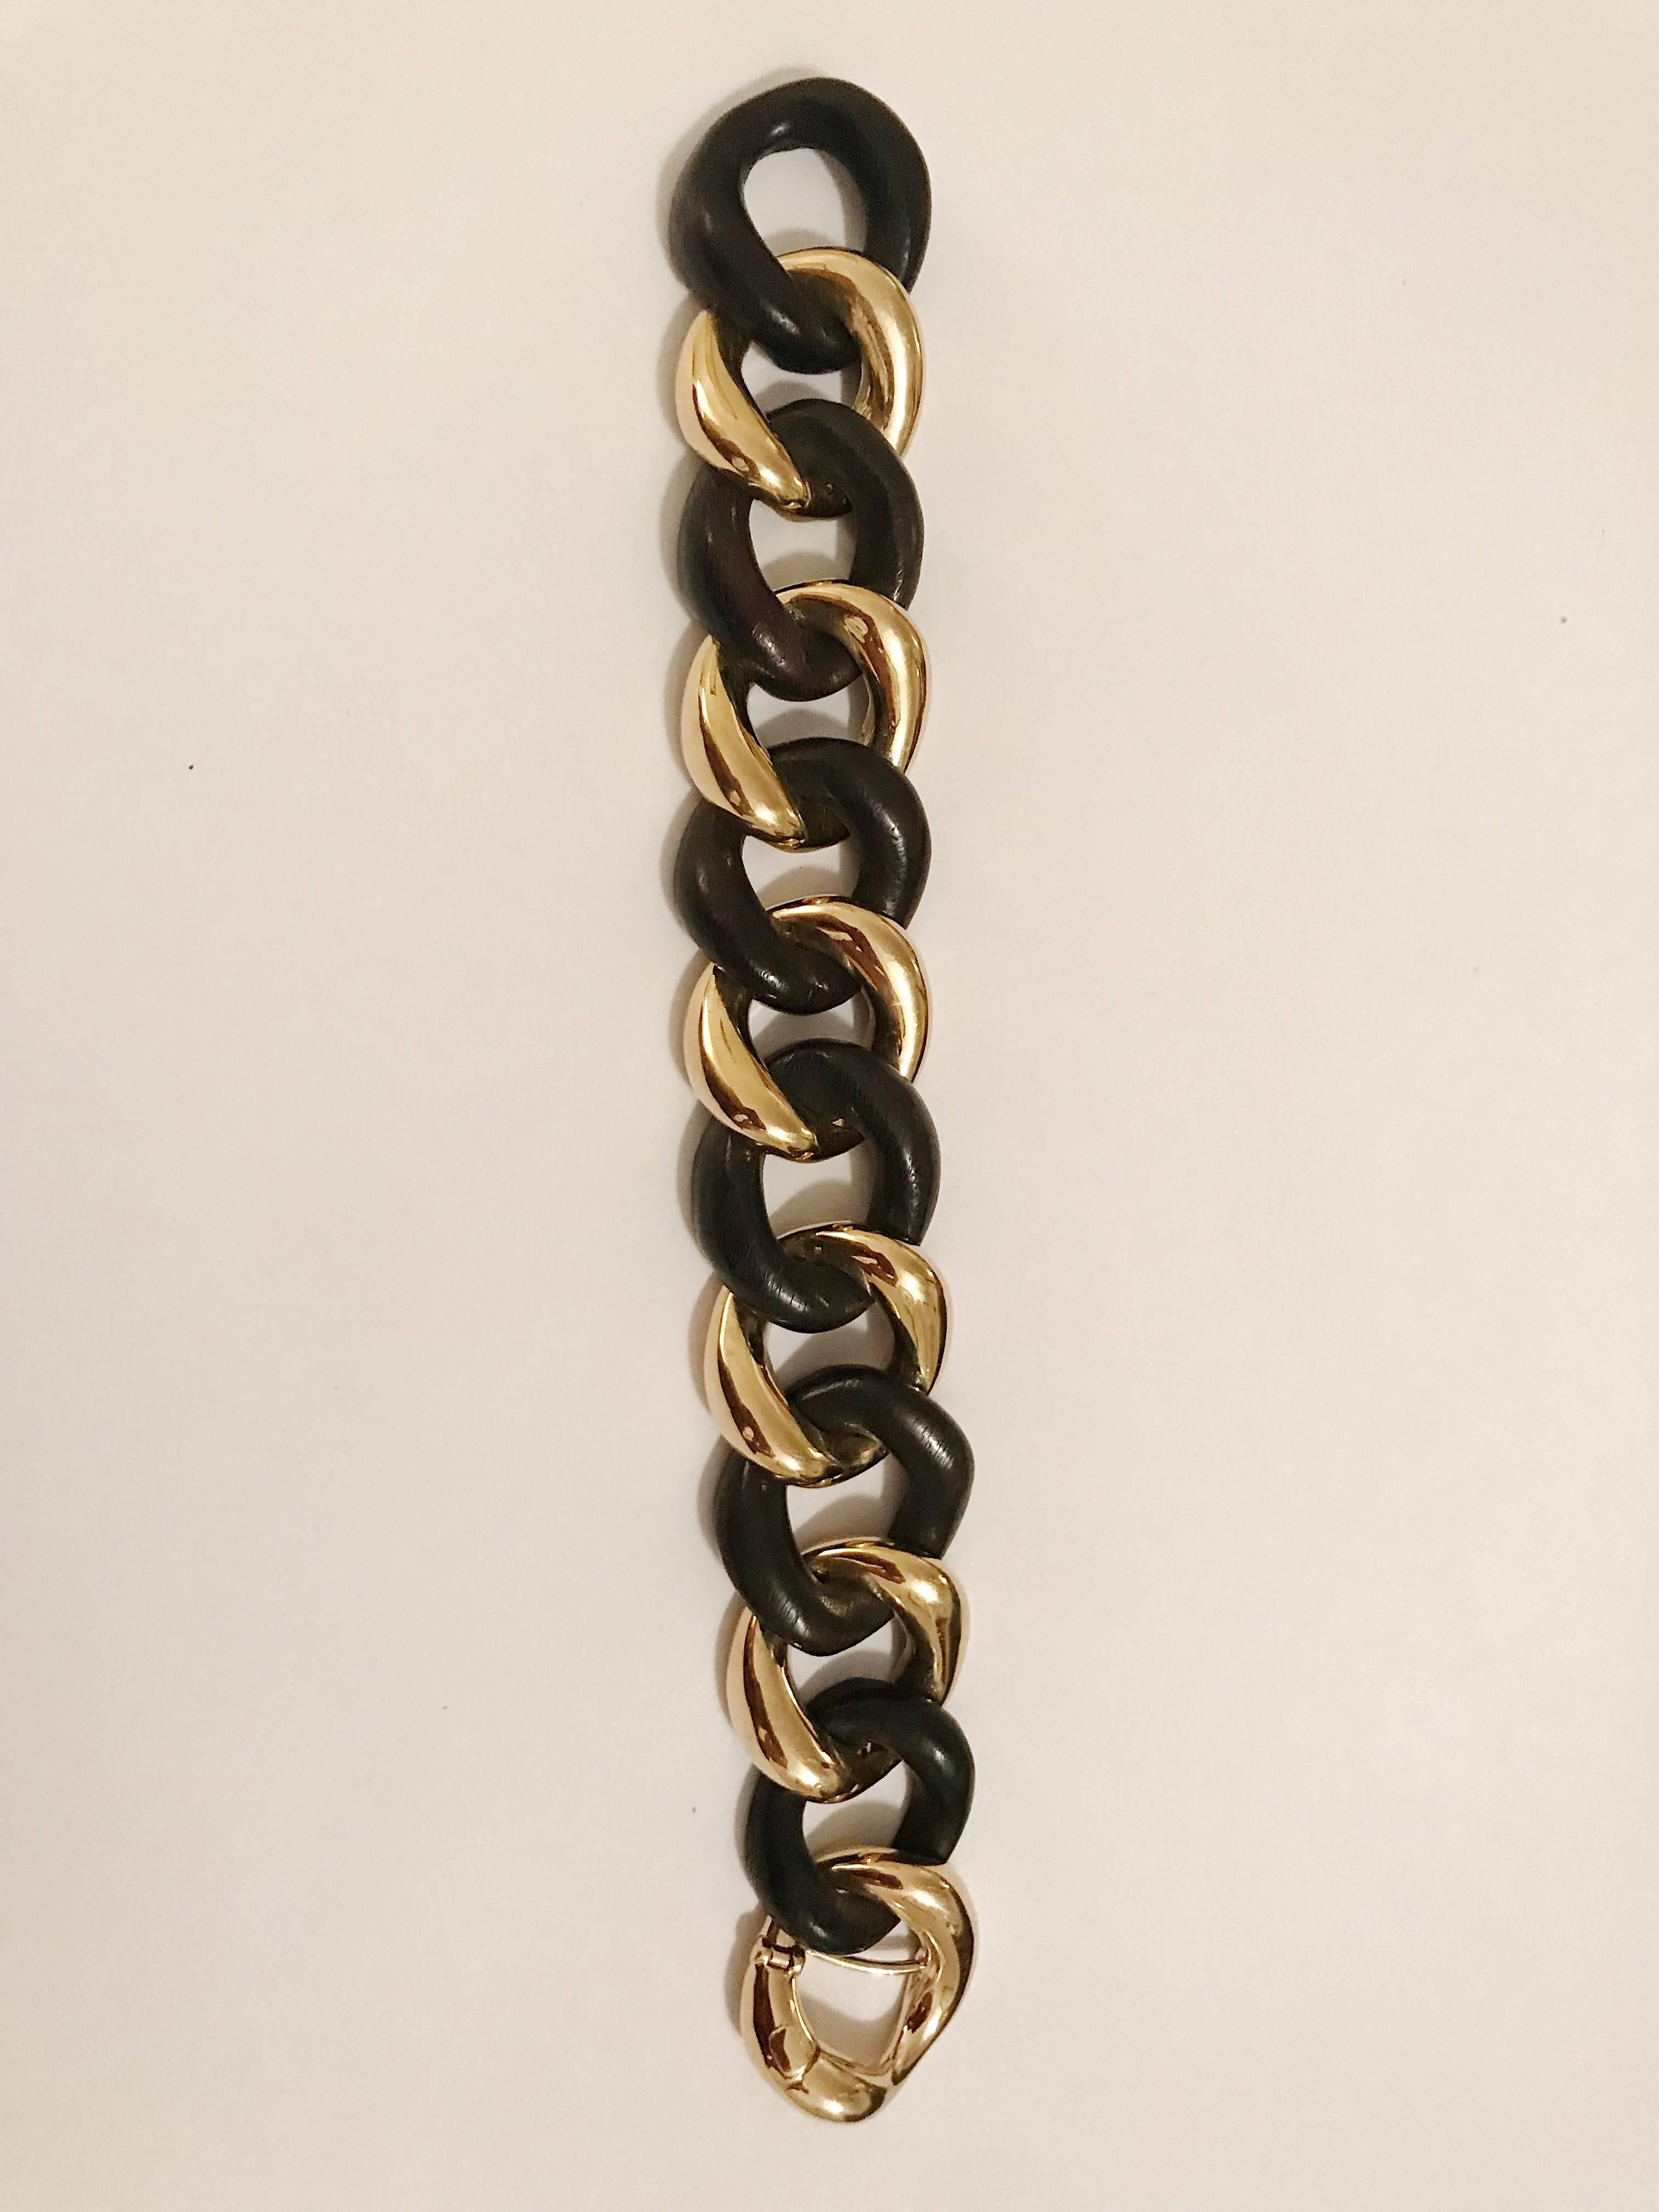 Elegant 18kt Yellow Gold and Cocobolo Wood curved link bracelet with self-link closure. The fabulous bracelet measure 7 1/2 inches but can be made to any measurement. The gold and Multi Wood links measure approximately 3/4